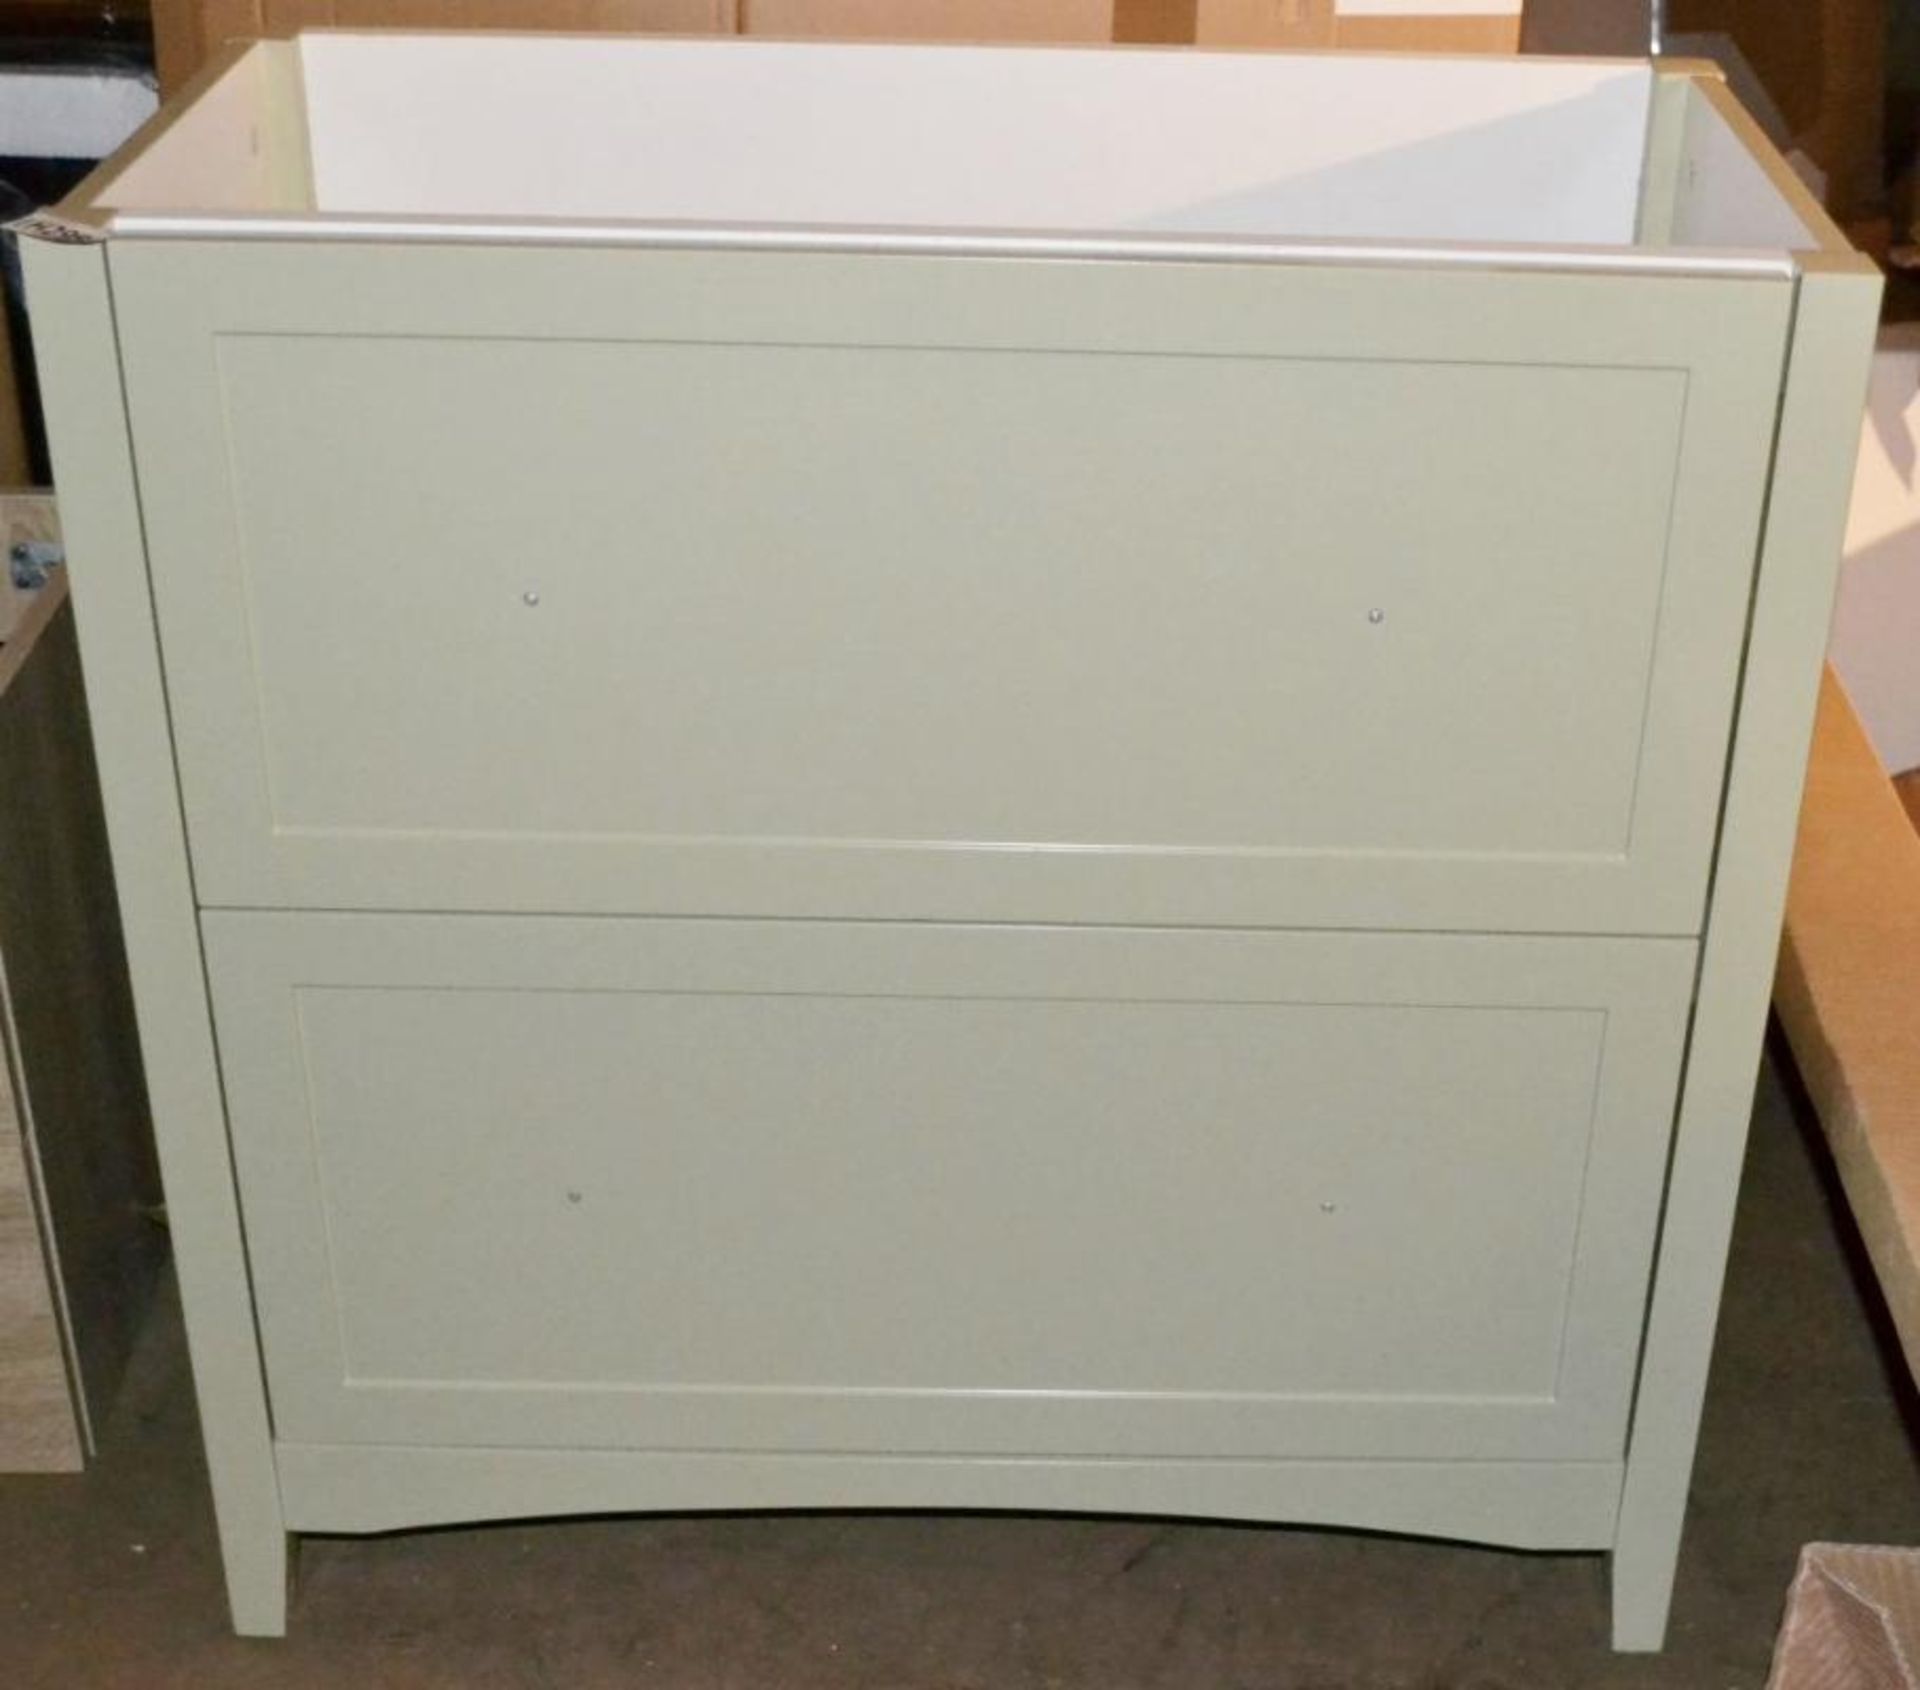 1 x Camberley 800 2-Drawer Soft Close Vanity Unit In Sage Green - New / Unused Stock - Dimensions: W - Image 2 of 8